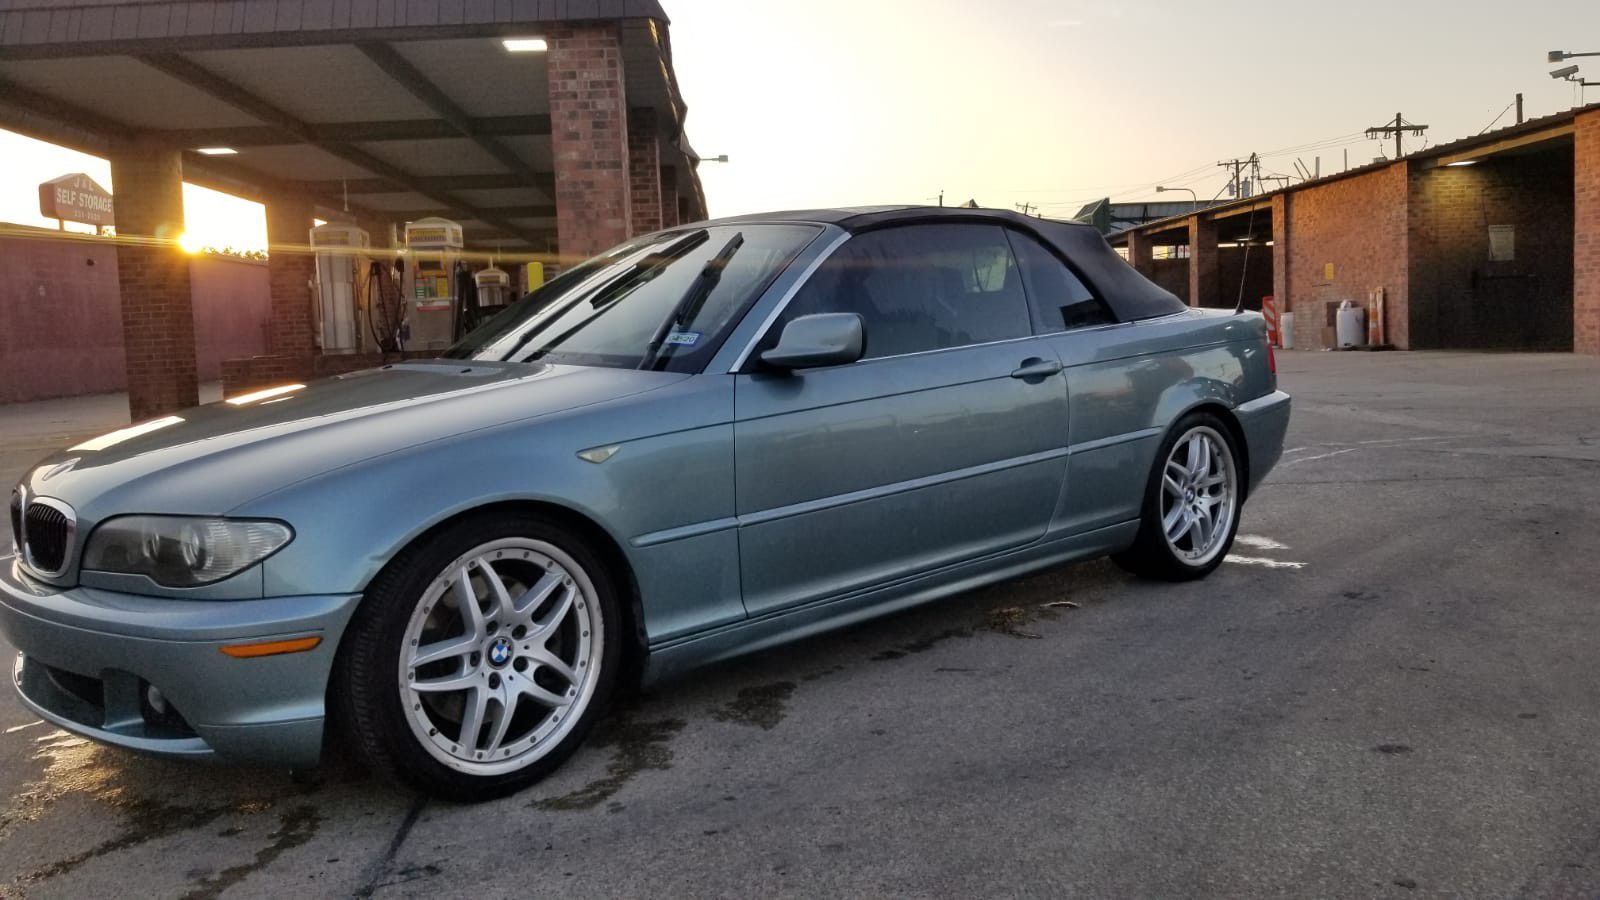 2004 BMW 330ci Convertible , automatic, 6 cylinders... car runs and drives... needs possibly a radiator or water pump, needs struts.. cold a/c,